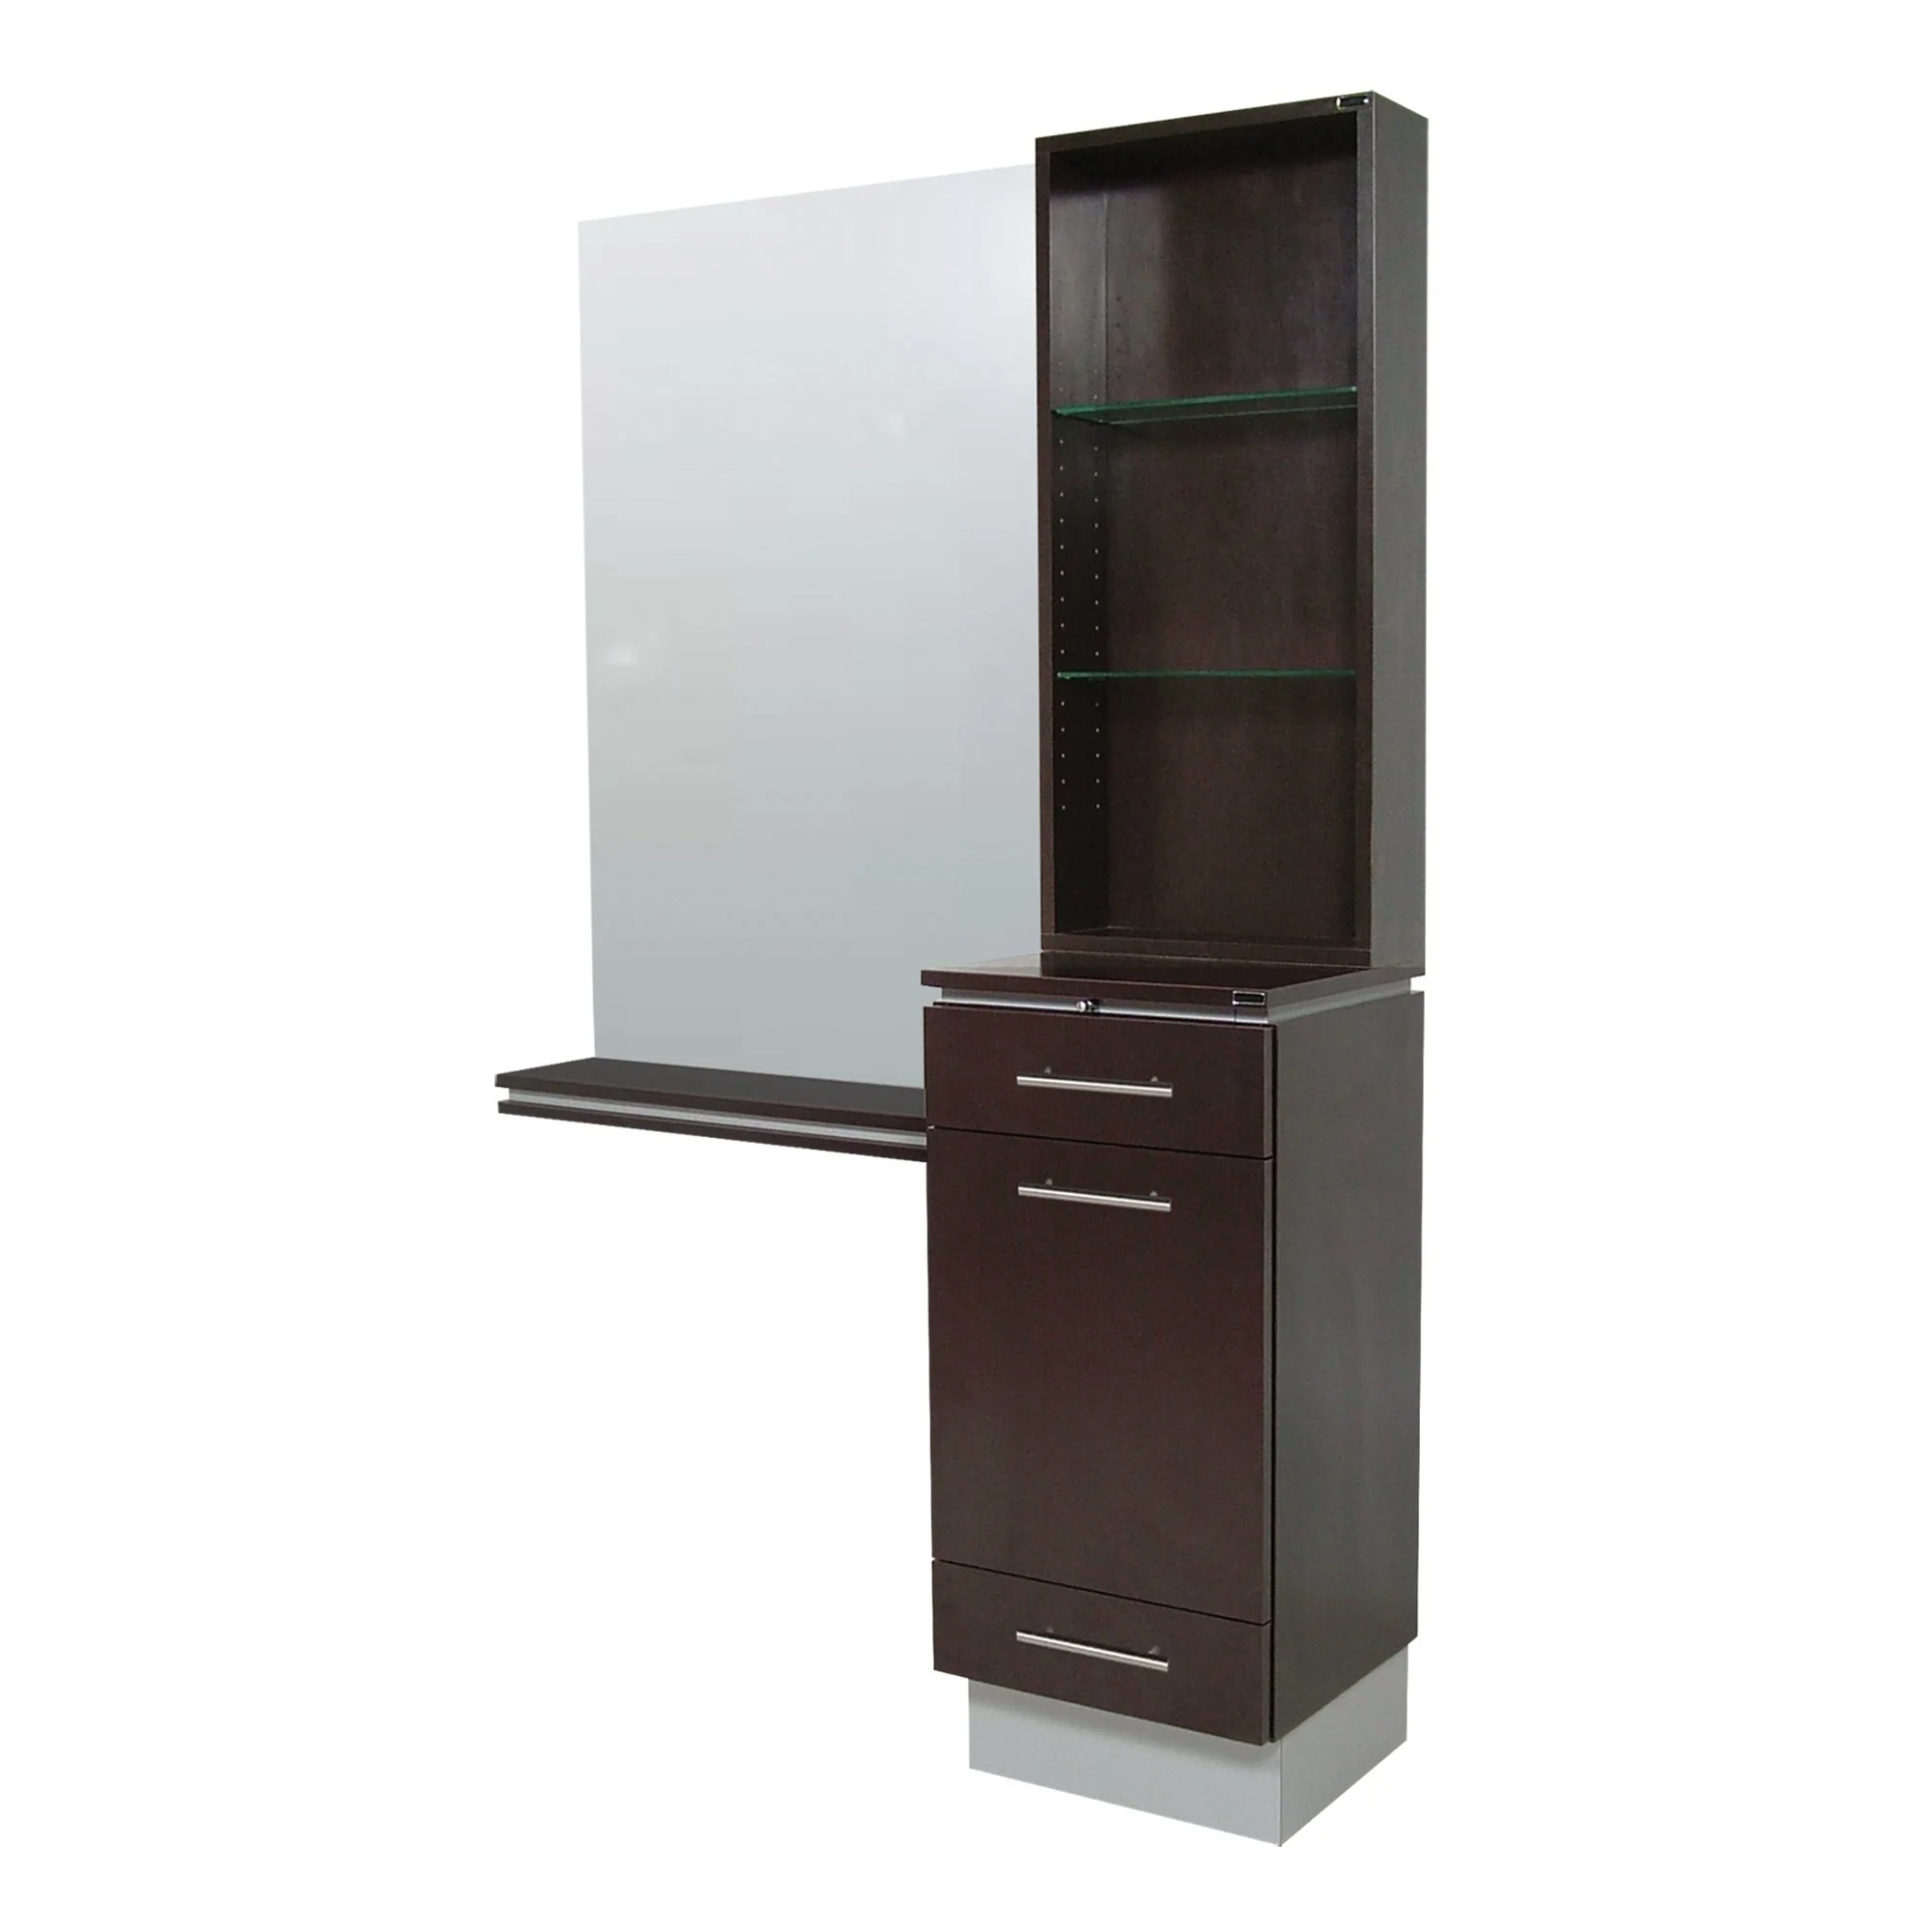 Collins NEO London Tower Styling Station - COL-4408-54